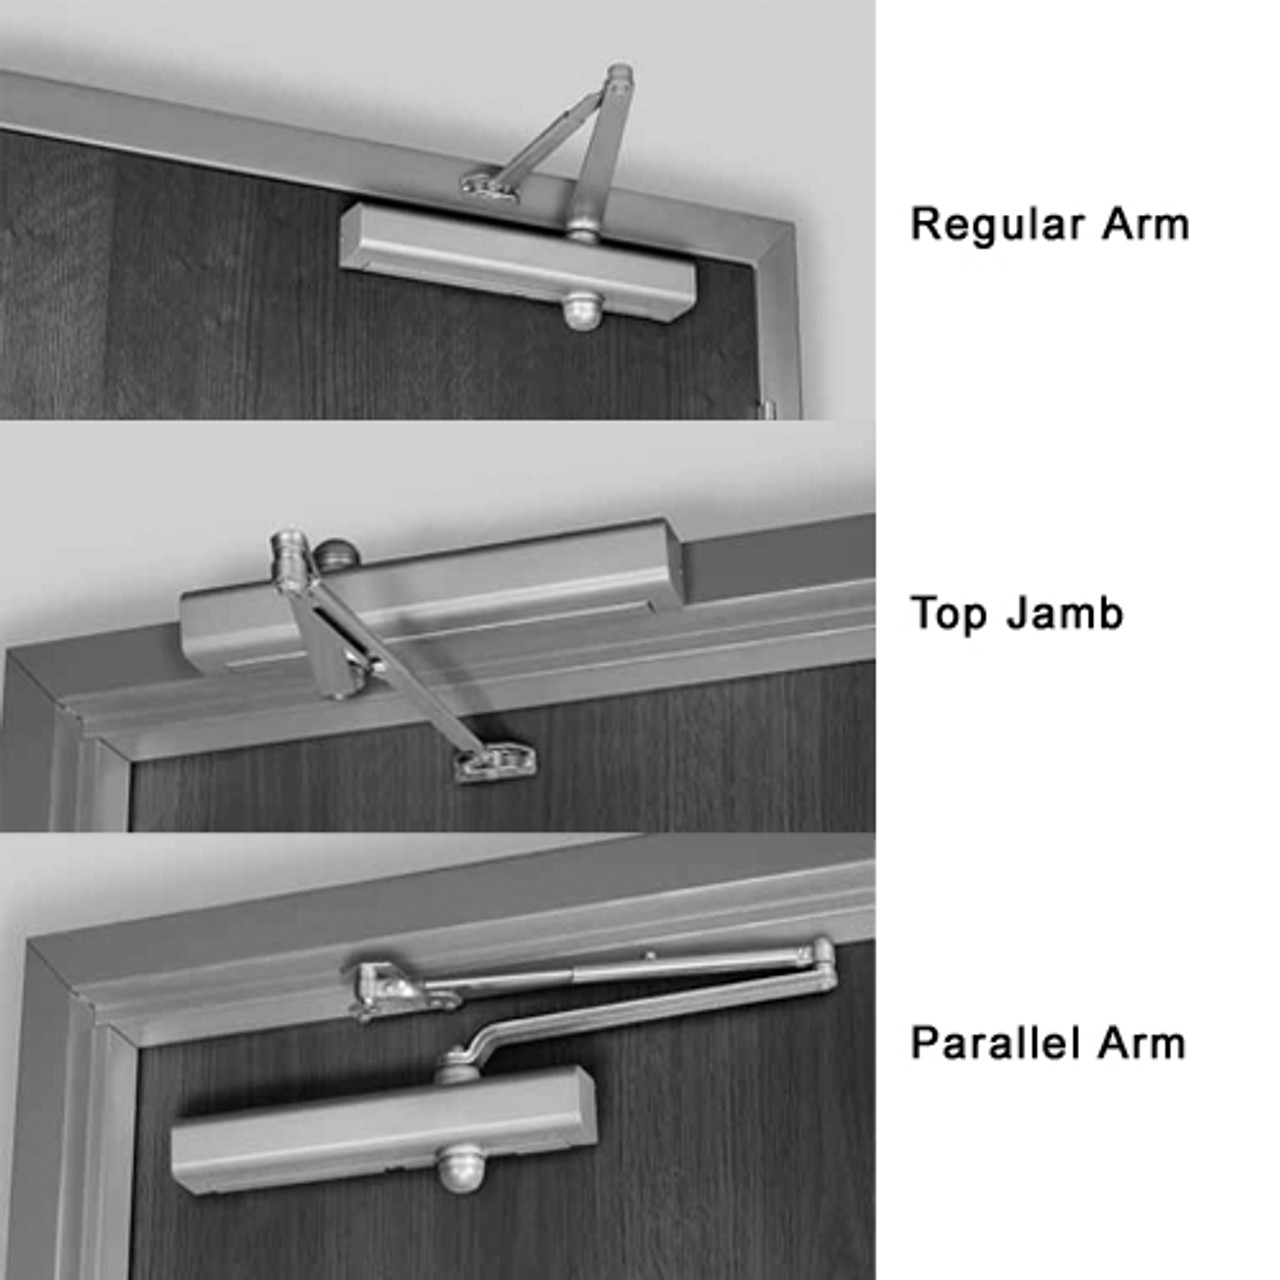 8501A-691 Norton 8000 Series Full Cover Non-Hold Open Door Closers with Regular Parallel and Top Jamb to 3 inch Reveal in Dull Bronze Finish